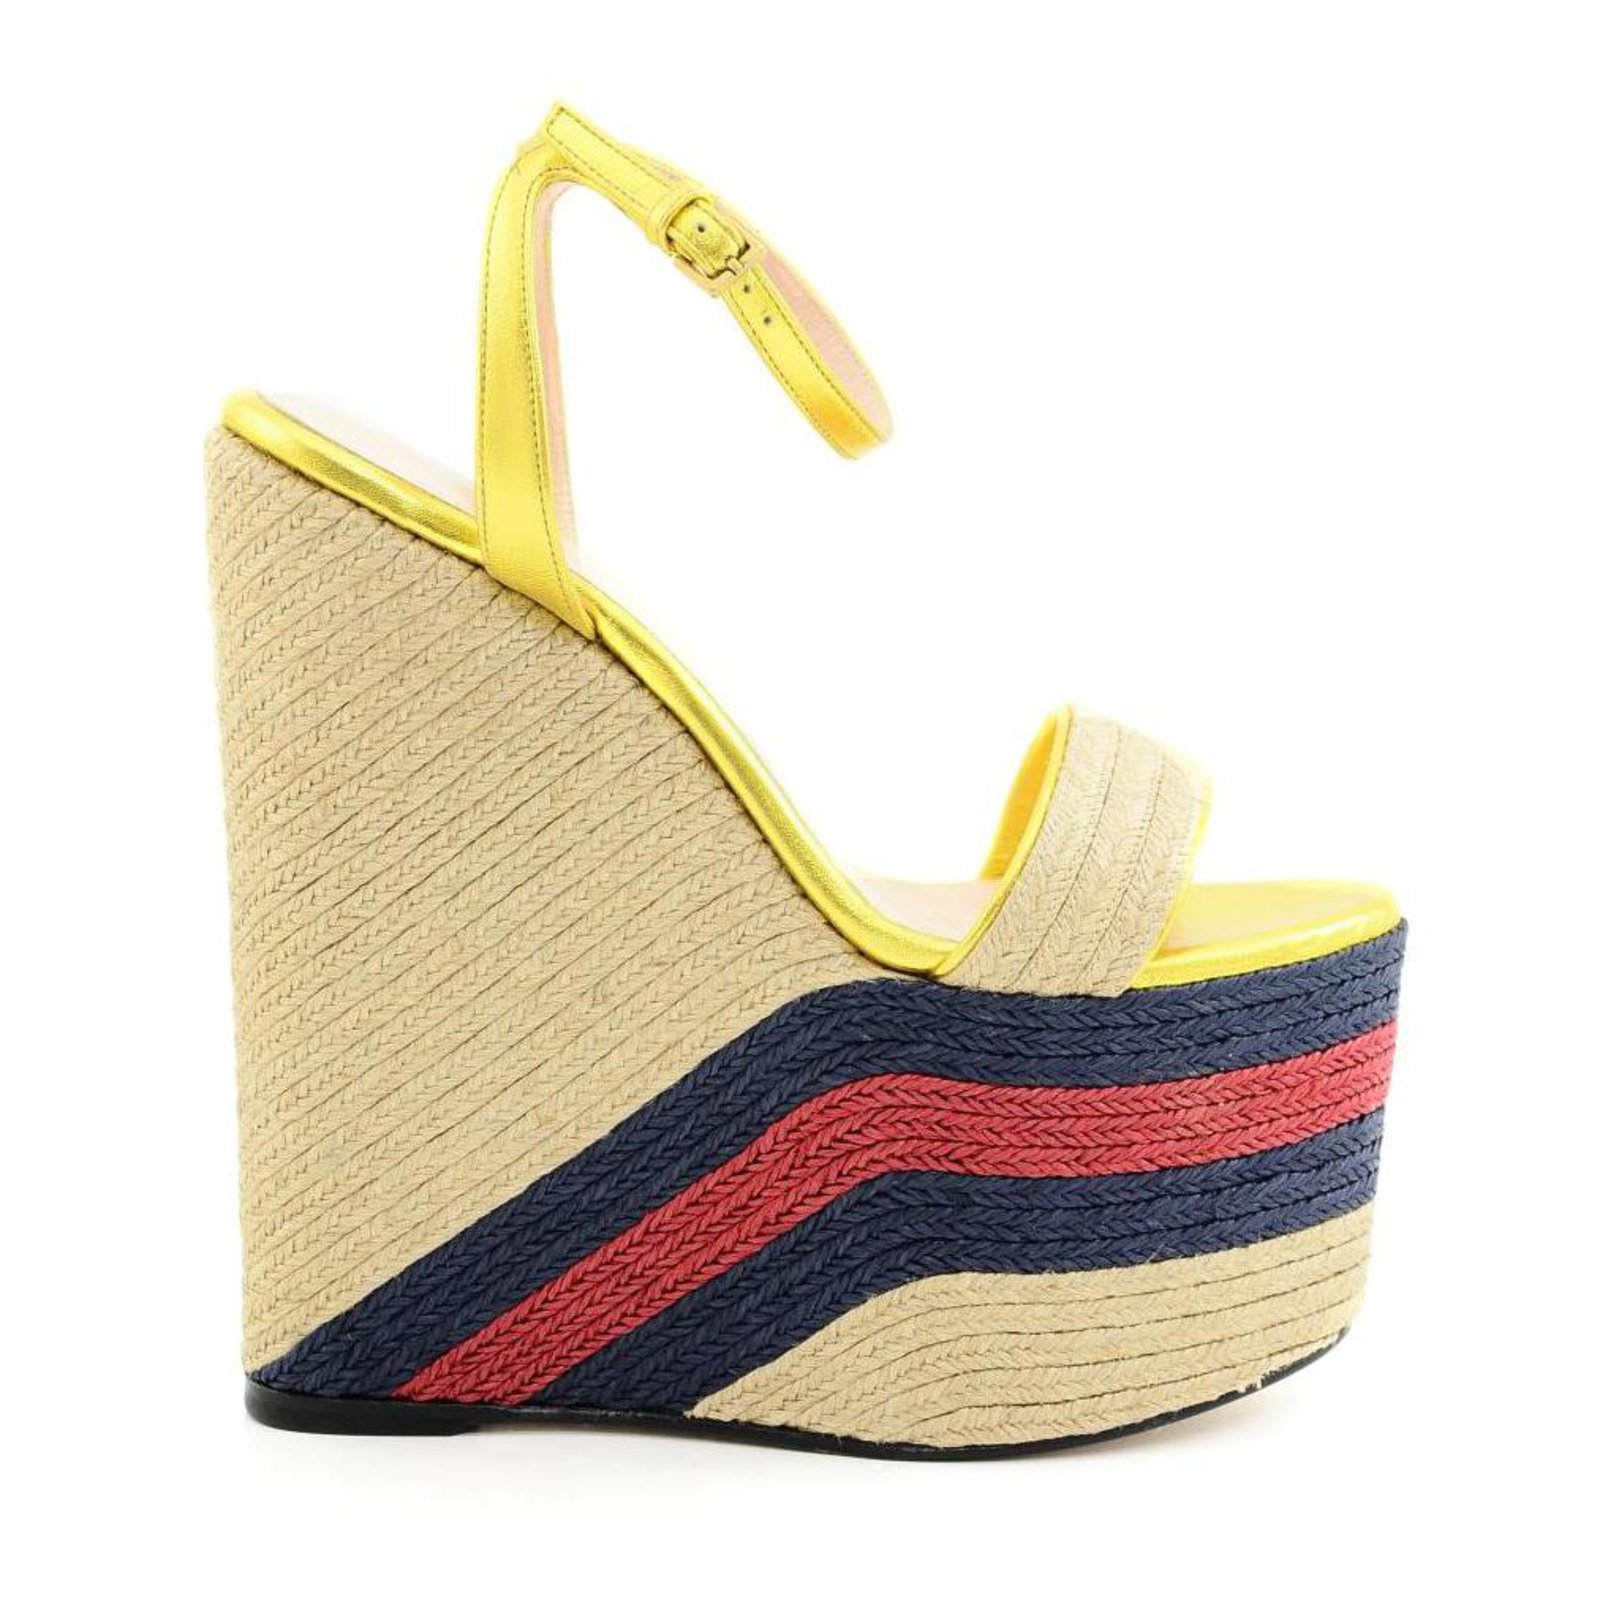 gucci sandals wedge